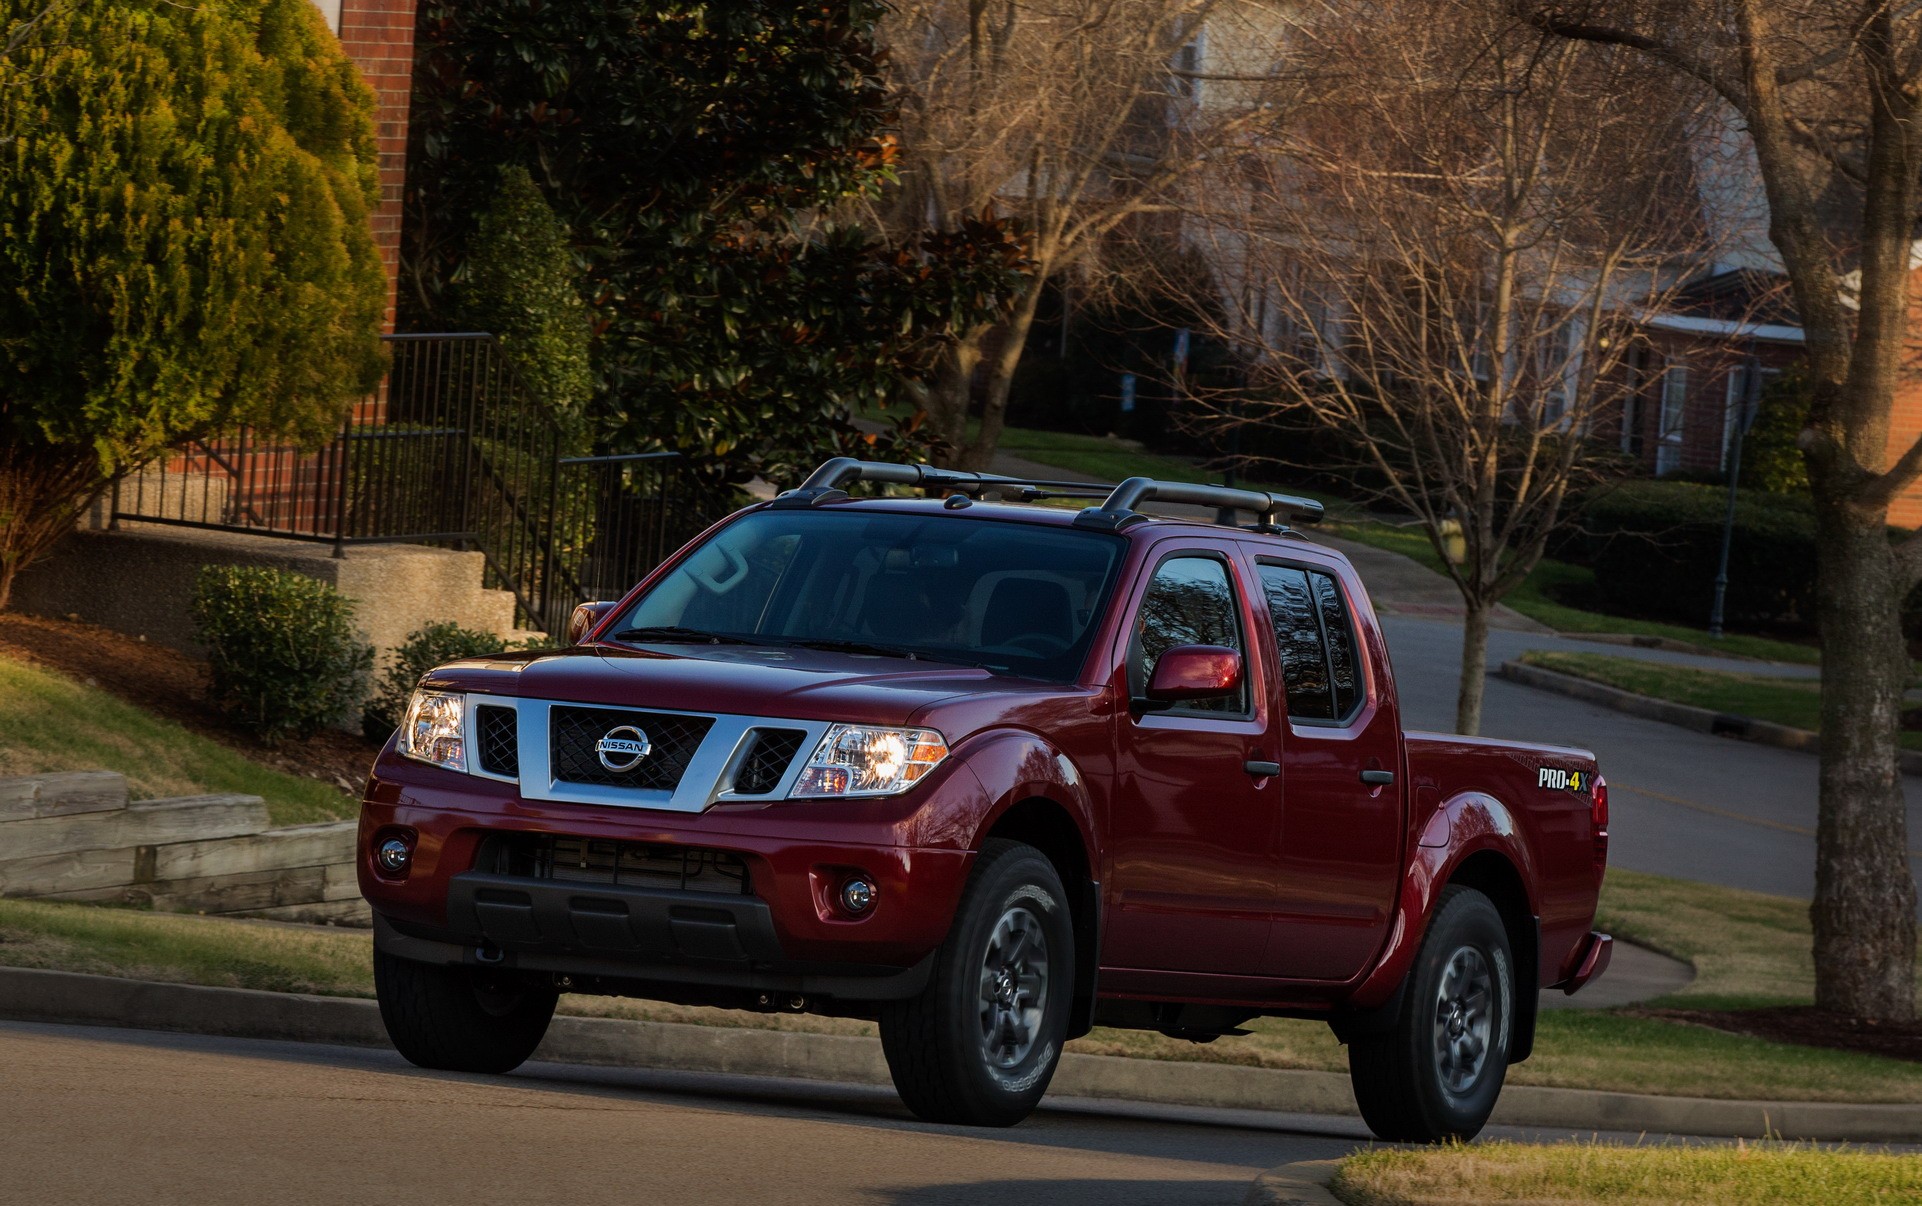 2020 Nissan Frontier With 2021 Nissan Frontier’s V6 Averages 20 MPG Combine...